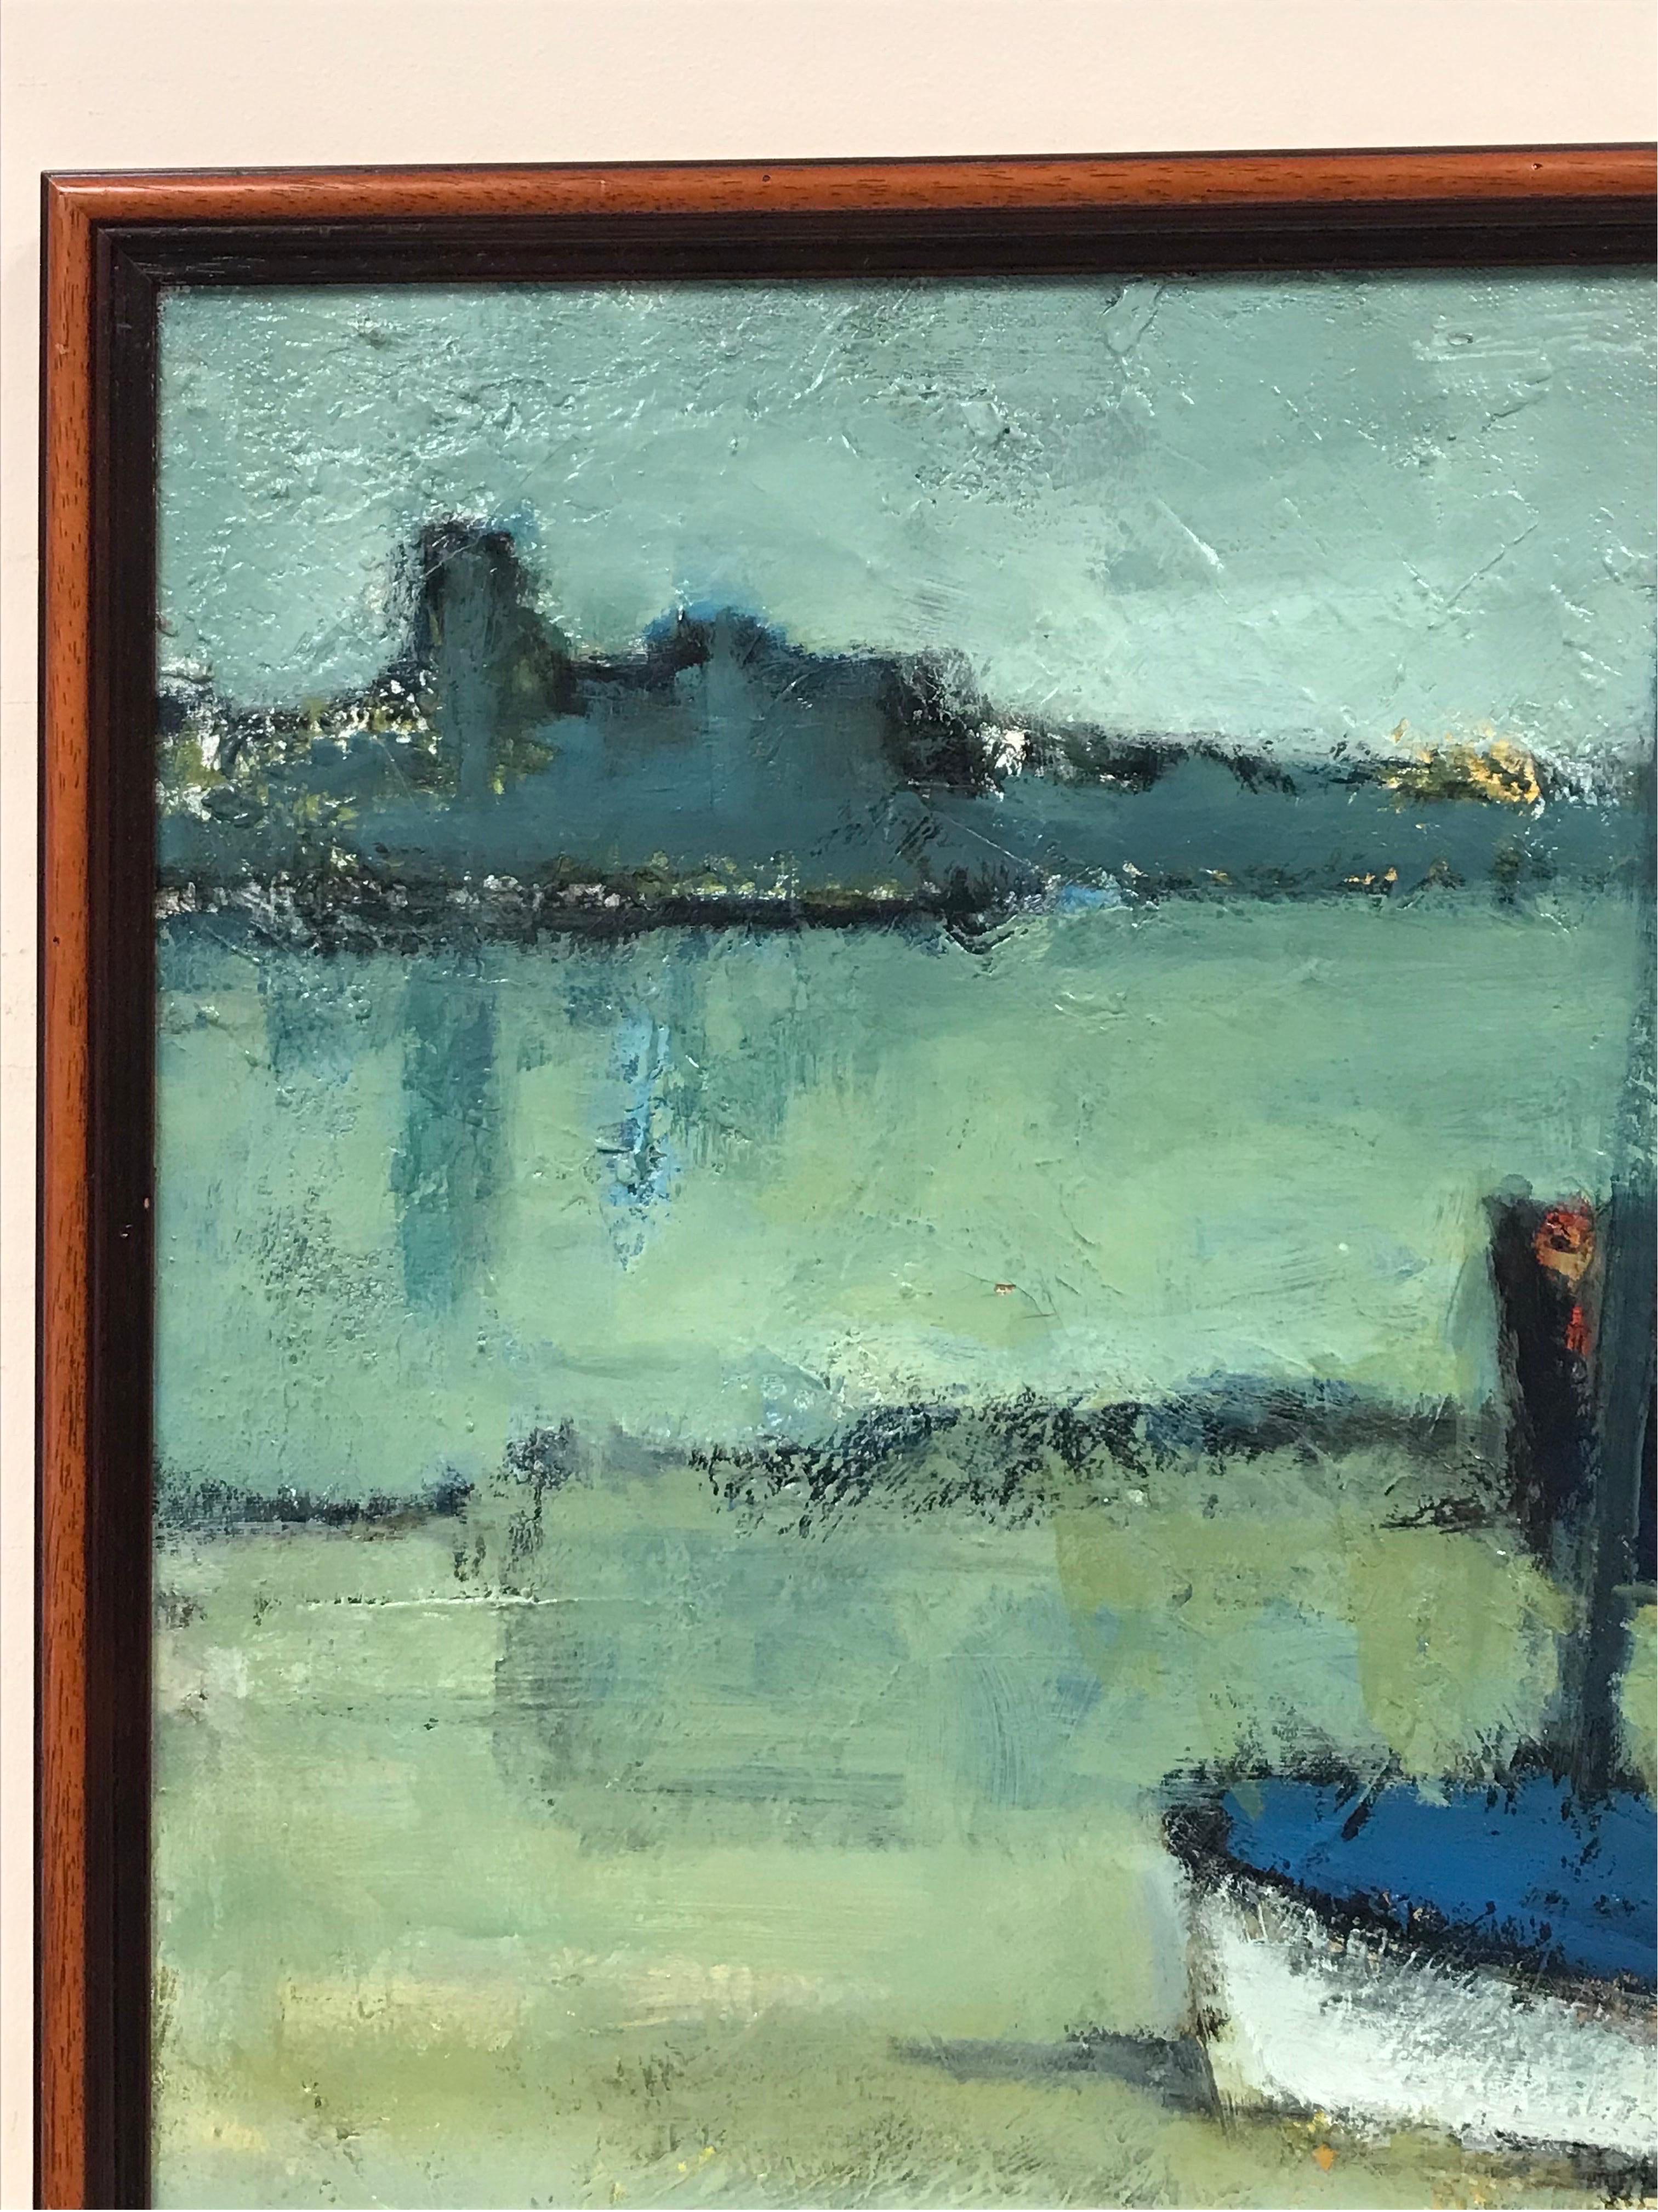 Artist/ School: Maurice Bilbeaud (French 1919-1997), signed and dated 1972, inscribed verso. 
Maurice Bilbeaud is a painter born in Sète in 1919, died in 1997 in Nice. Painter of nudes, animated landscapes, still life, marine. Post-Impressionist.